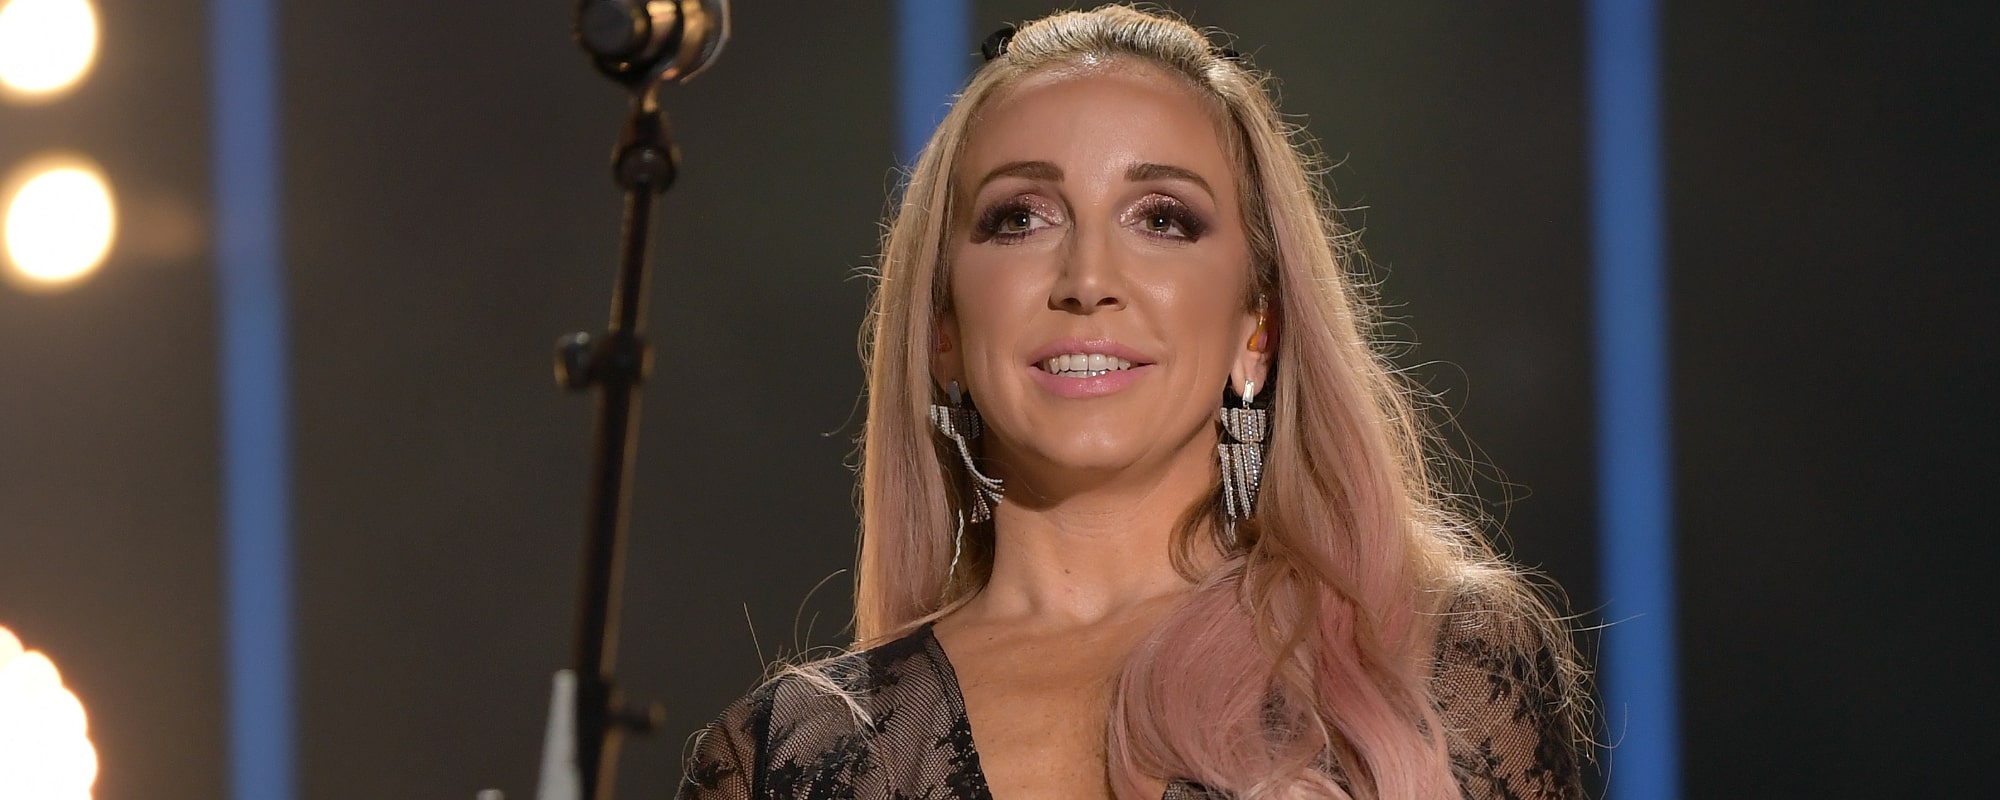 Ashley Monroe Opens up About Making New Music After Cancer Battle & Her Road to Remission